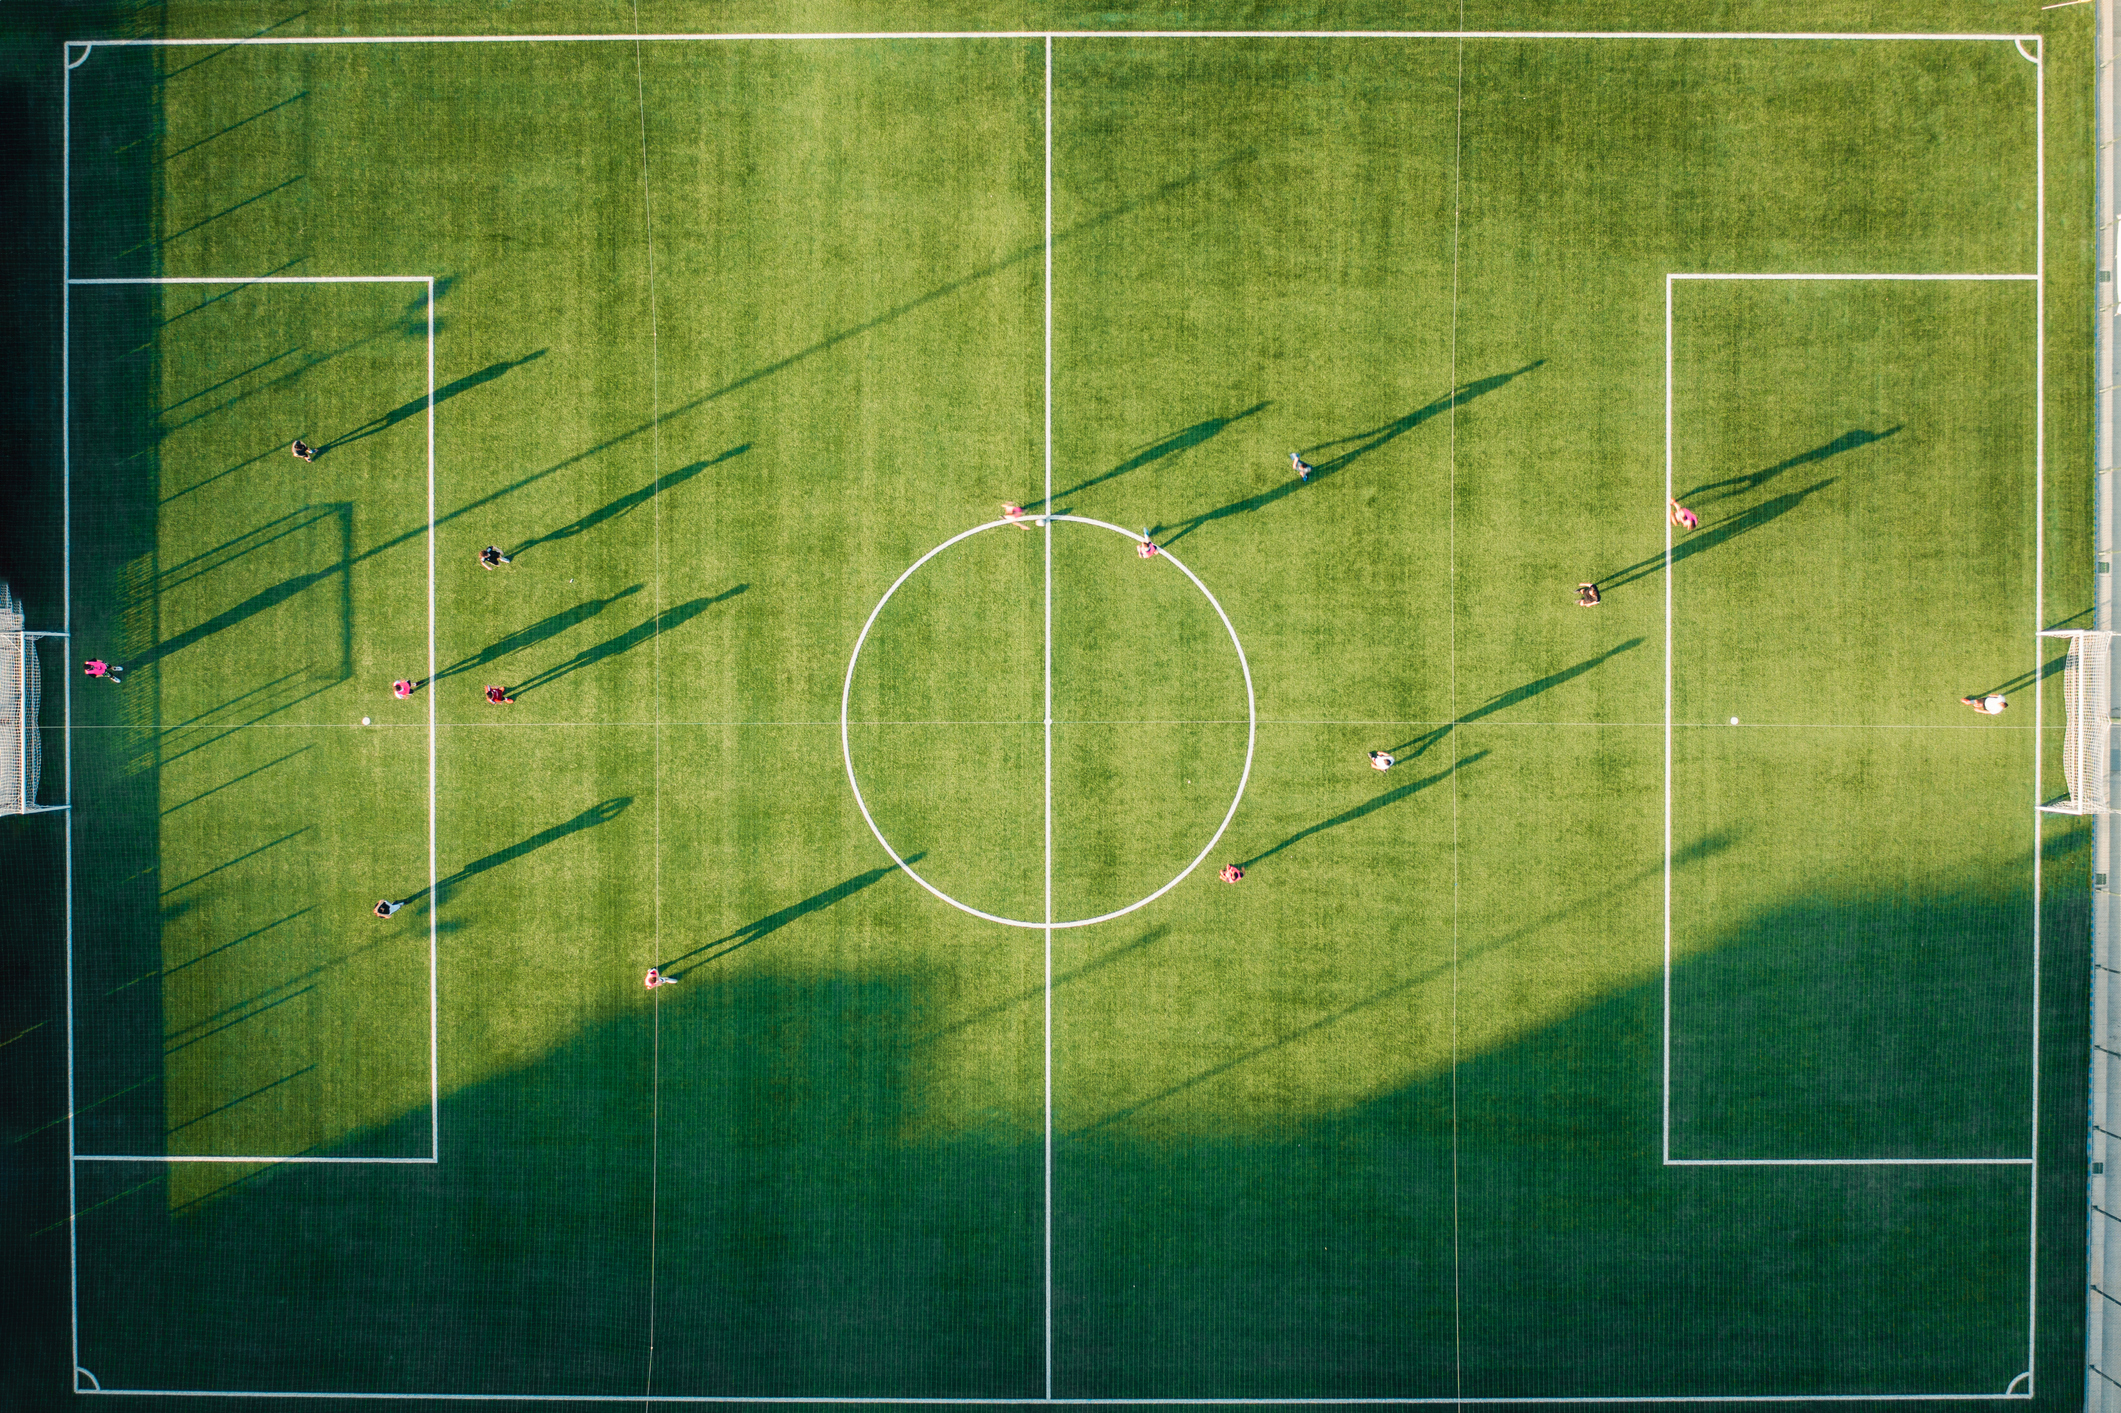 Aerial view of a large Football pitch with players seen dotted around it.